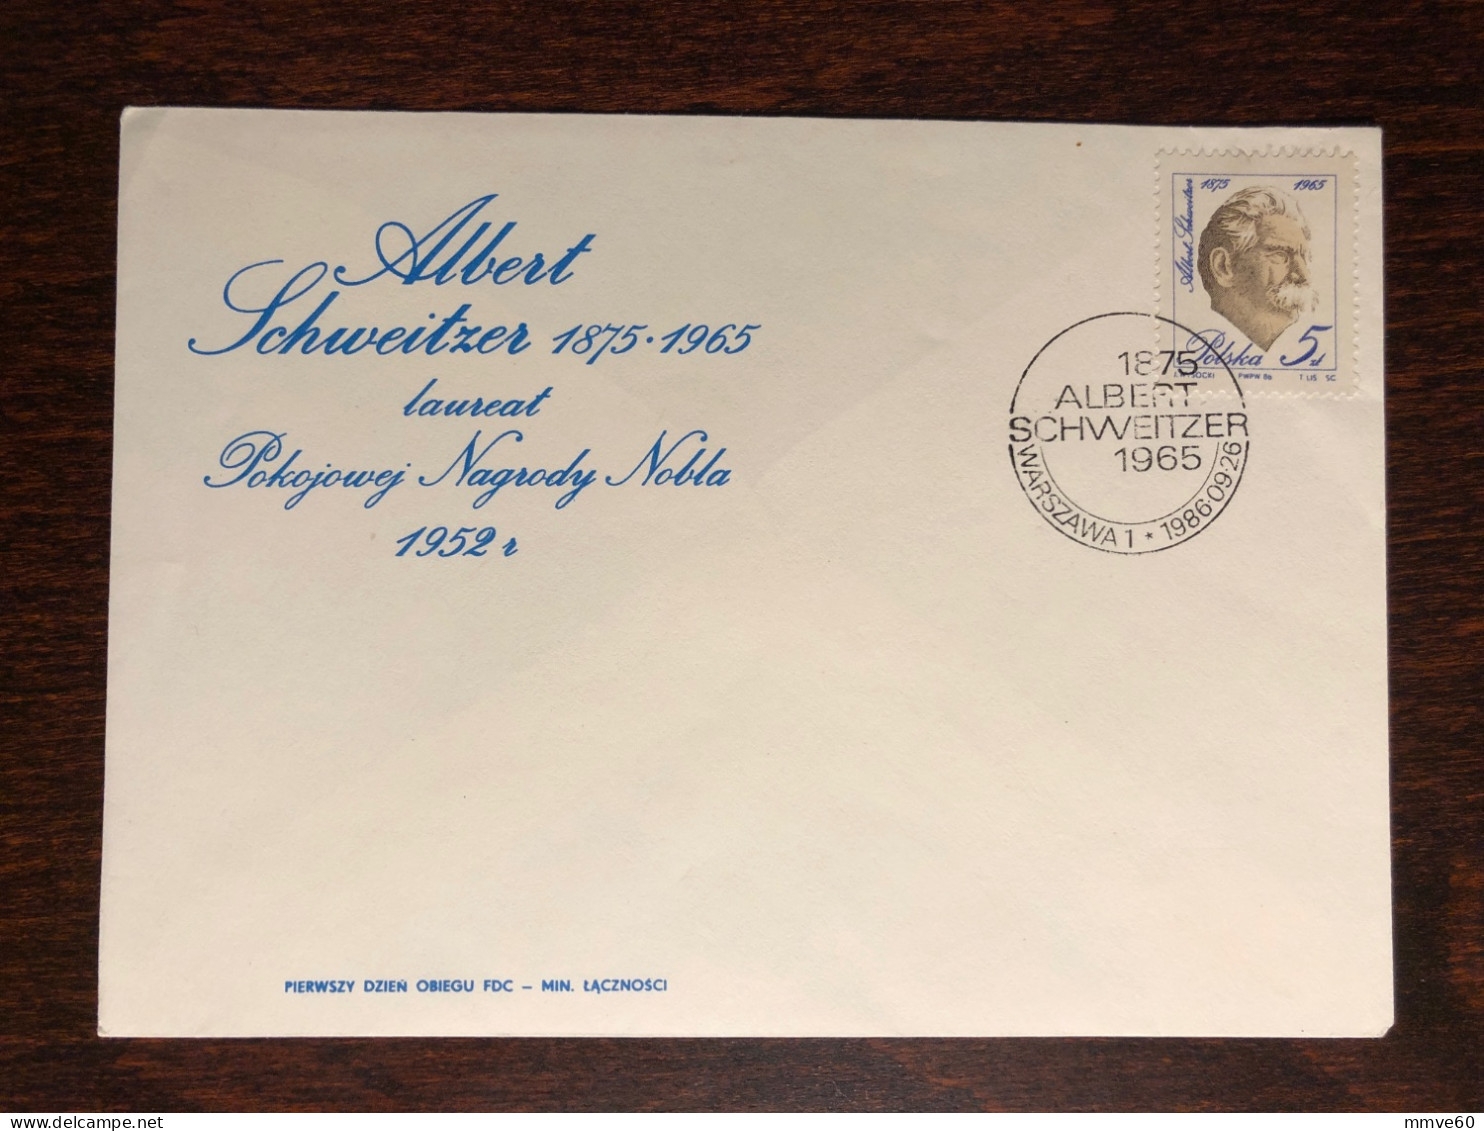 POLAND FDC COVER 1986 YEAR SCHWEITZER HEALTH MEDICINE STAMPS - FDC